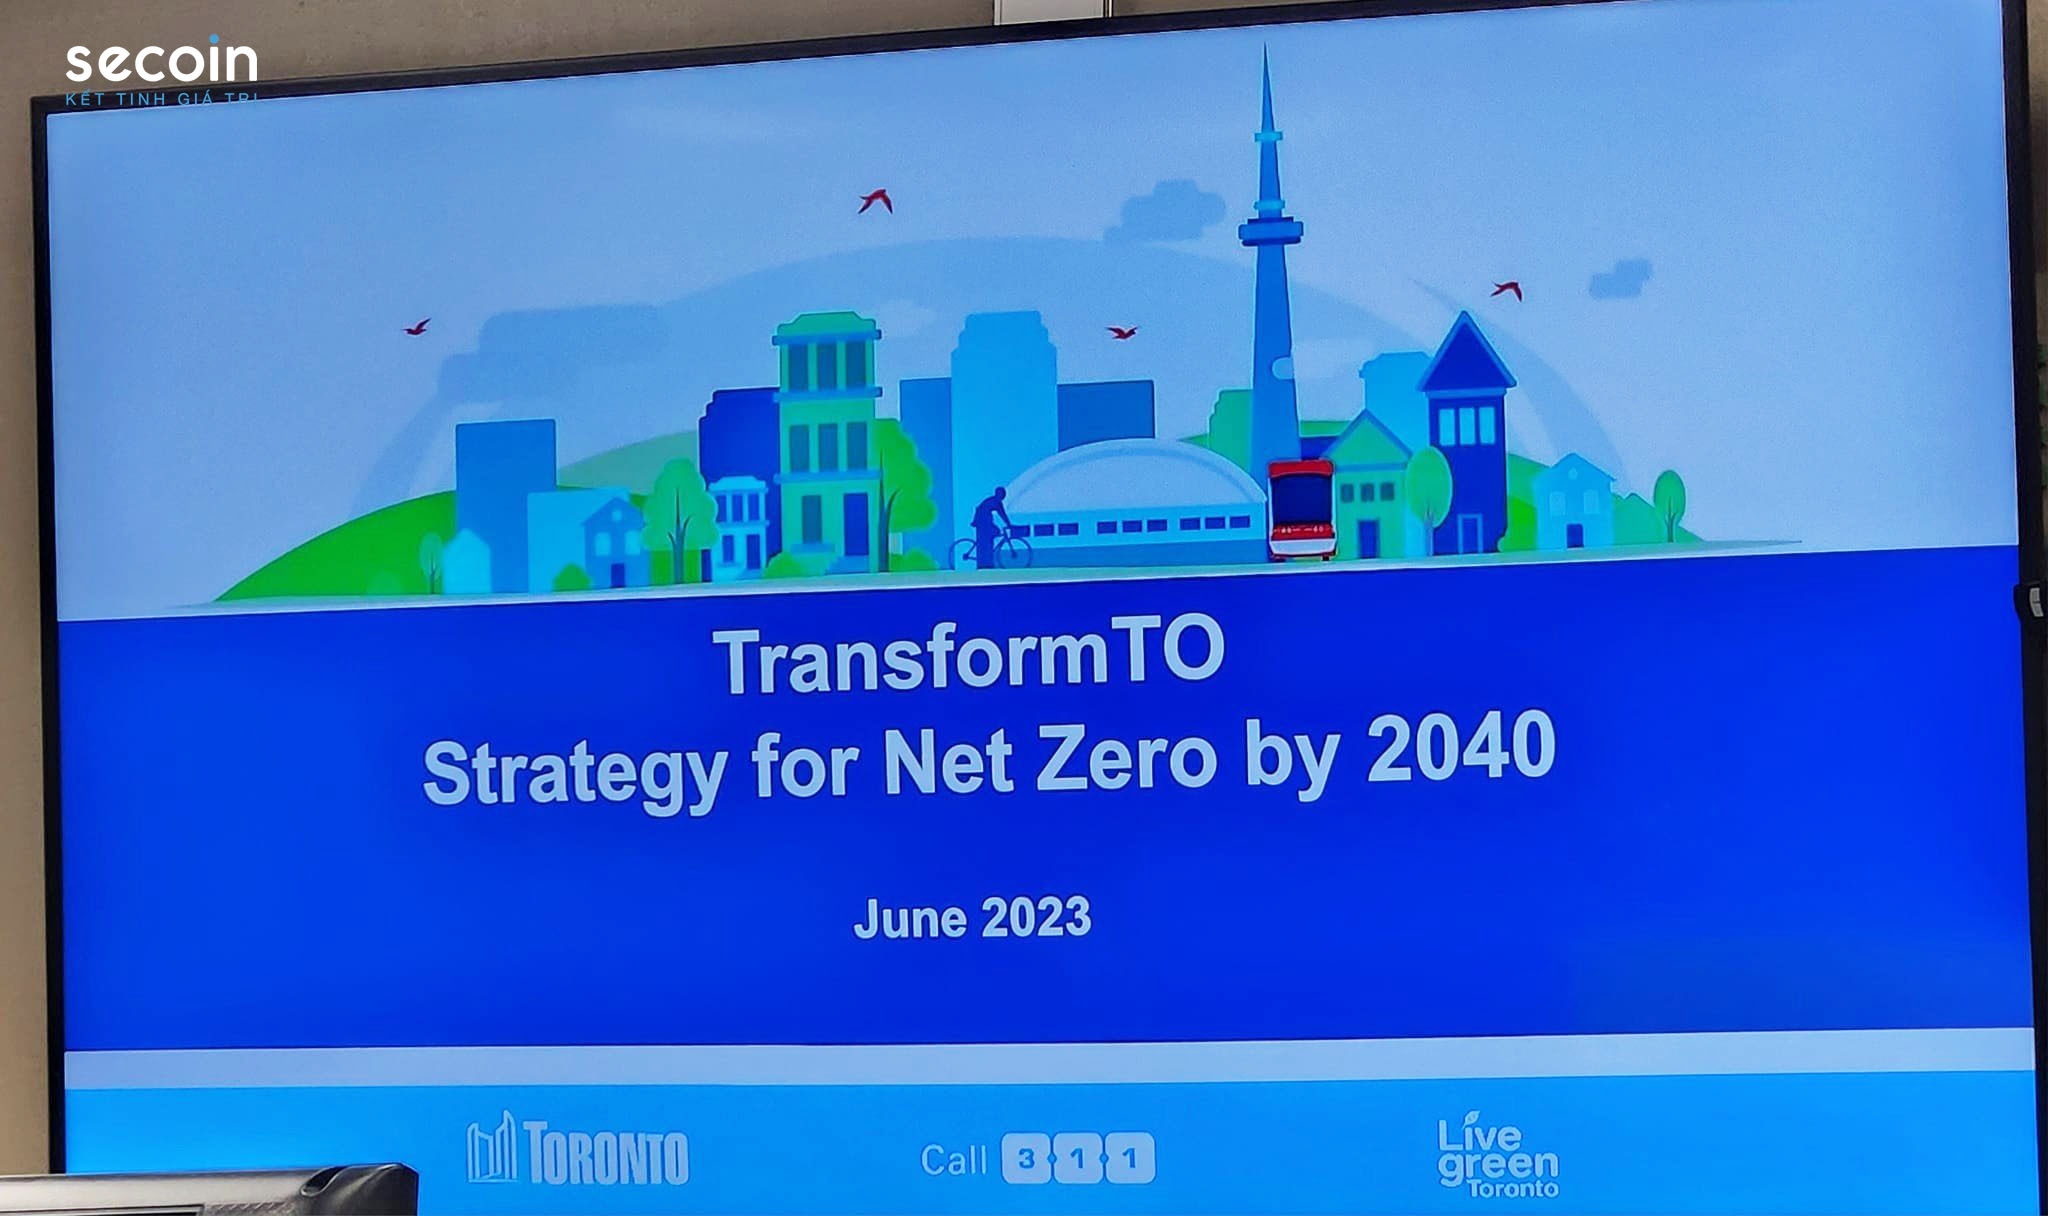 Secoin joins the team of working at Toronto Mayor’s office on green growth and Net Zero